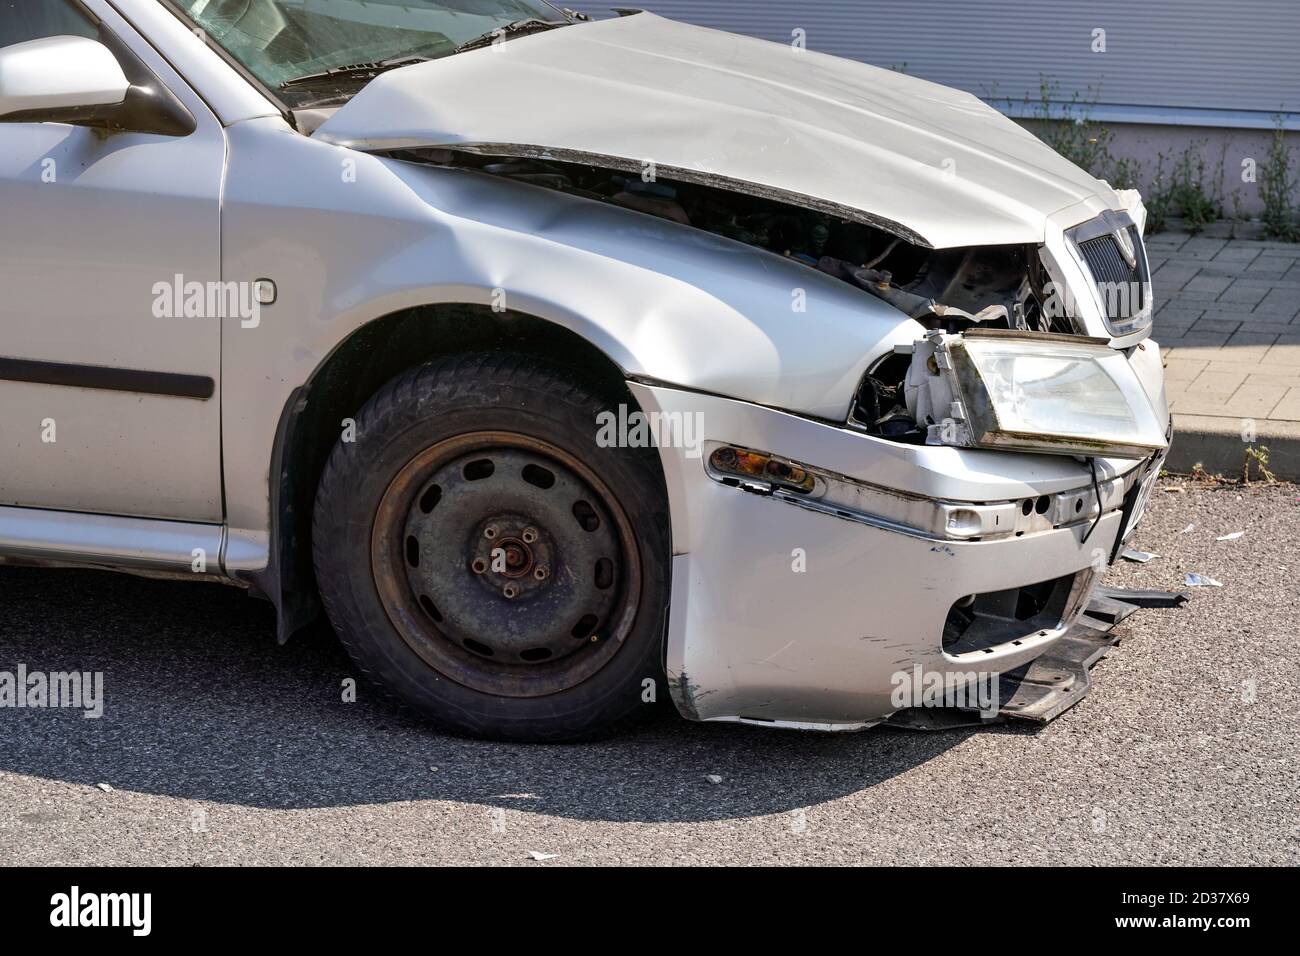 Silver car with its front crashed, plates dented and broken on asphalt road, detail to damaged part Stock Photo